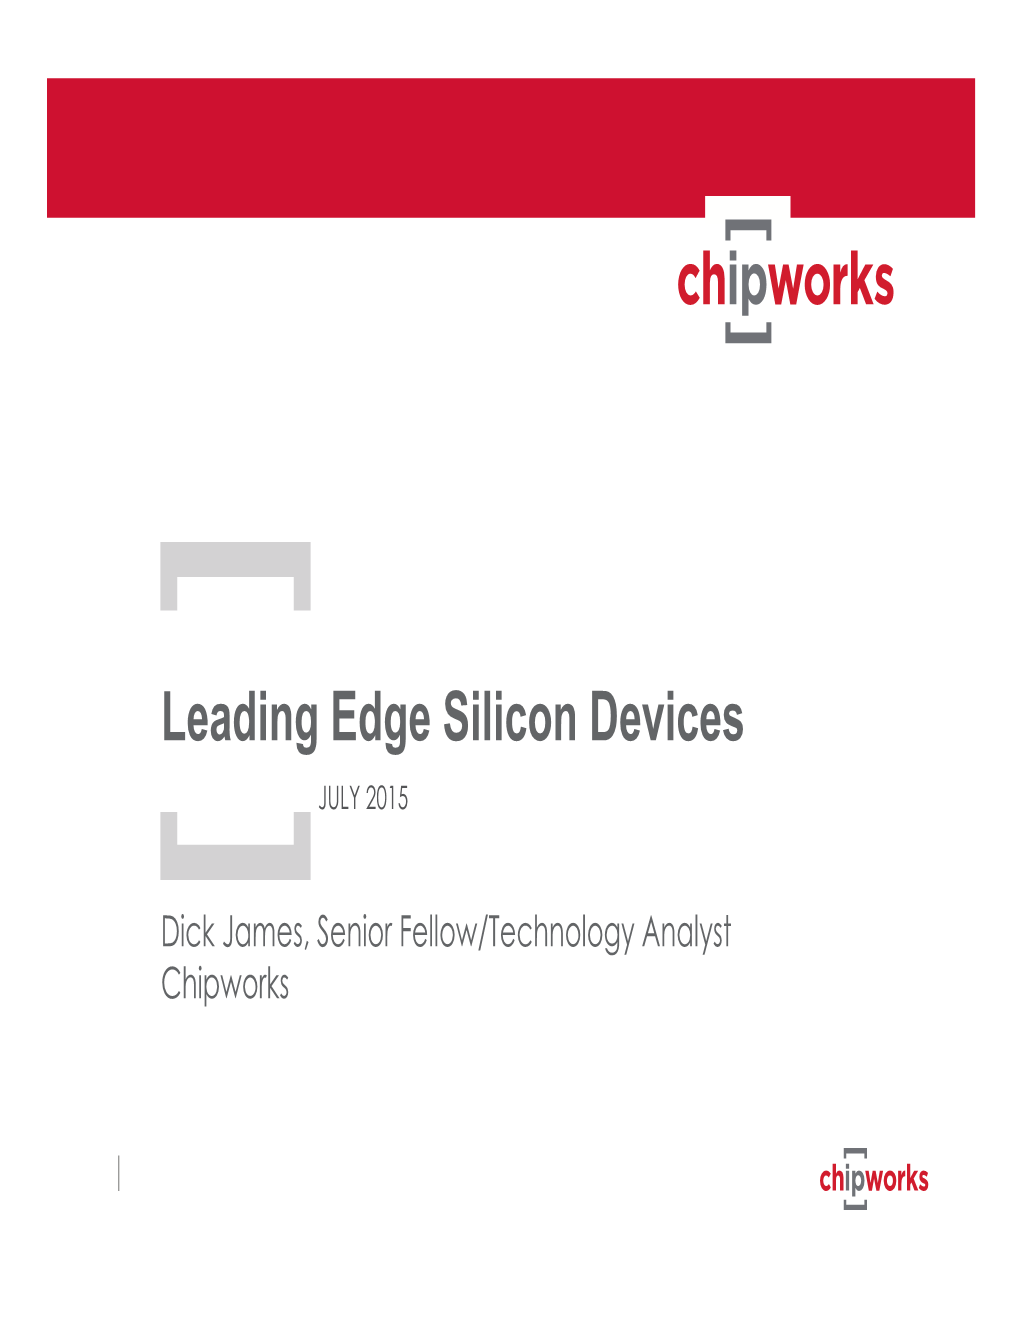 Leading Edge Silicon Devices, Dick James, Chipworks